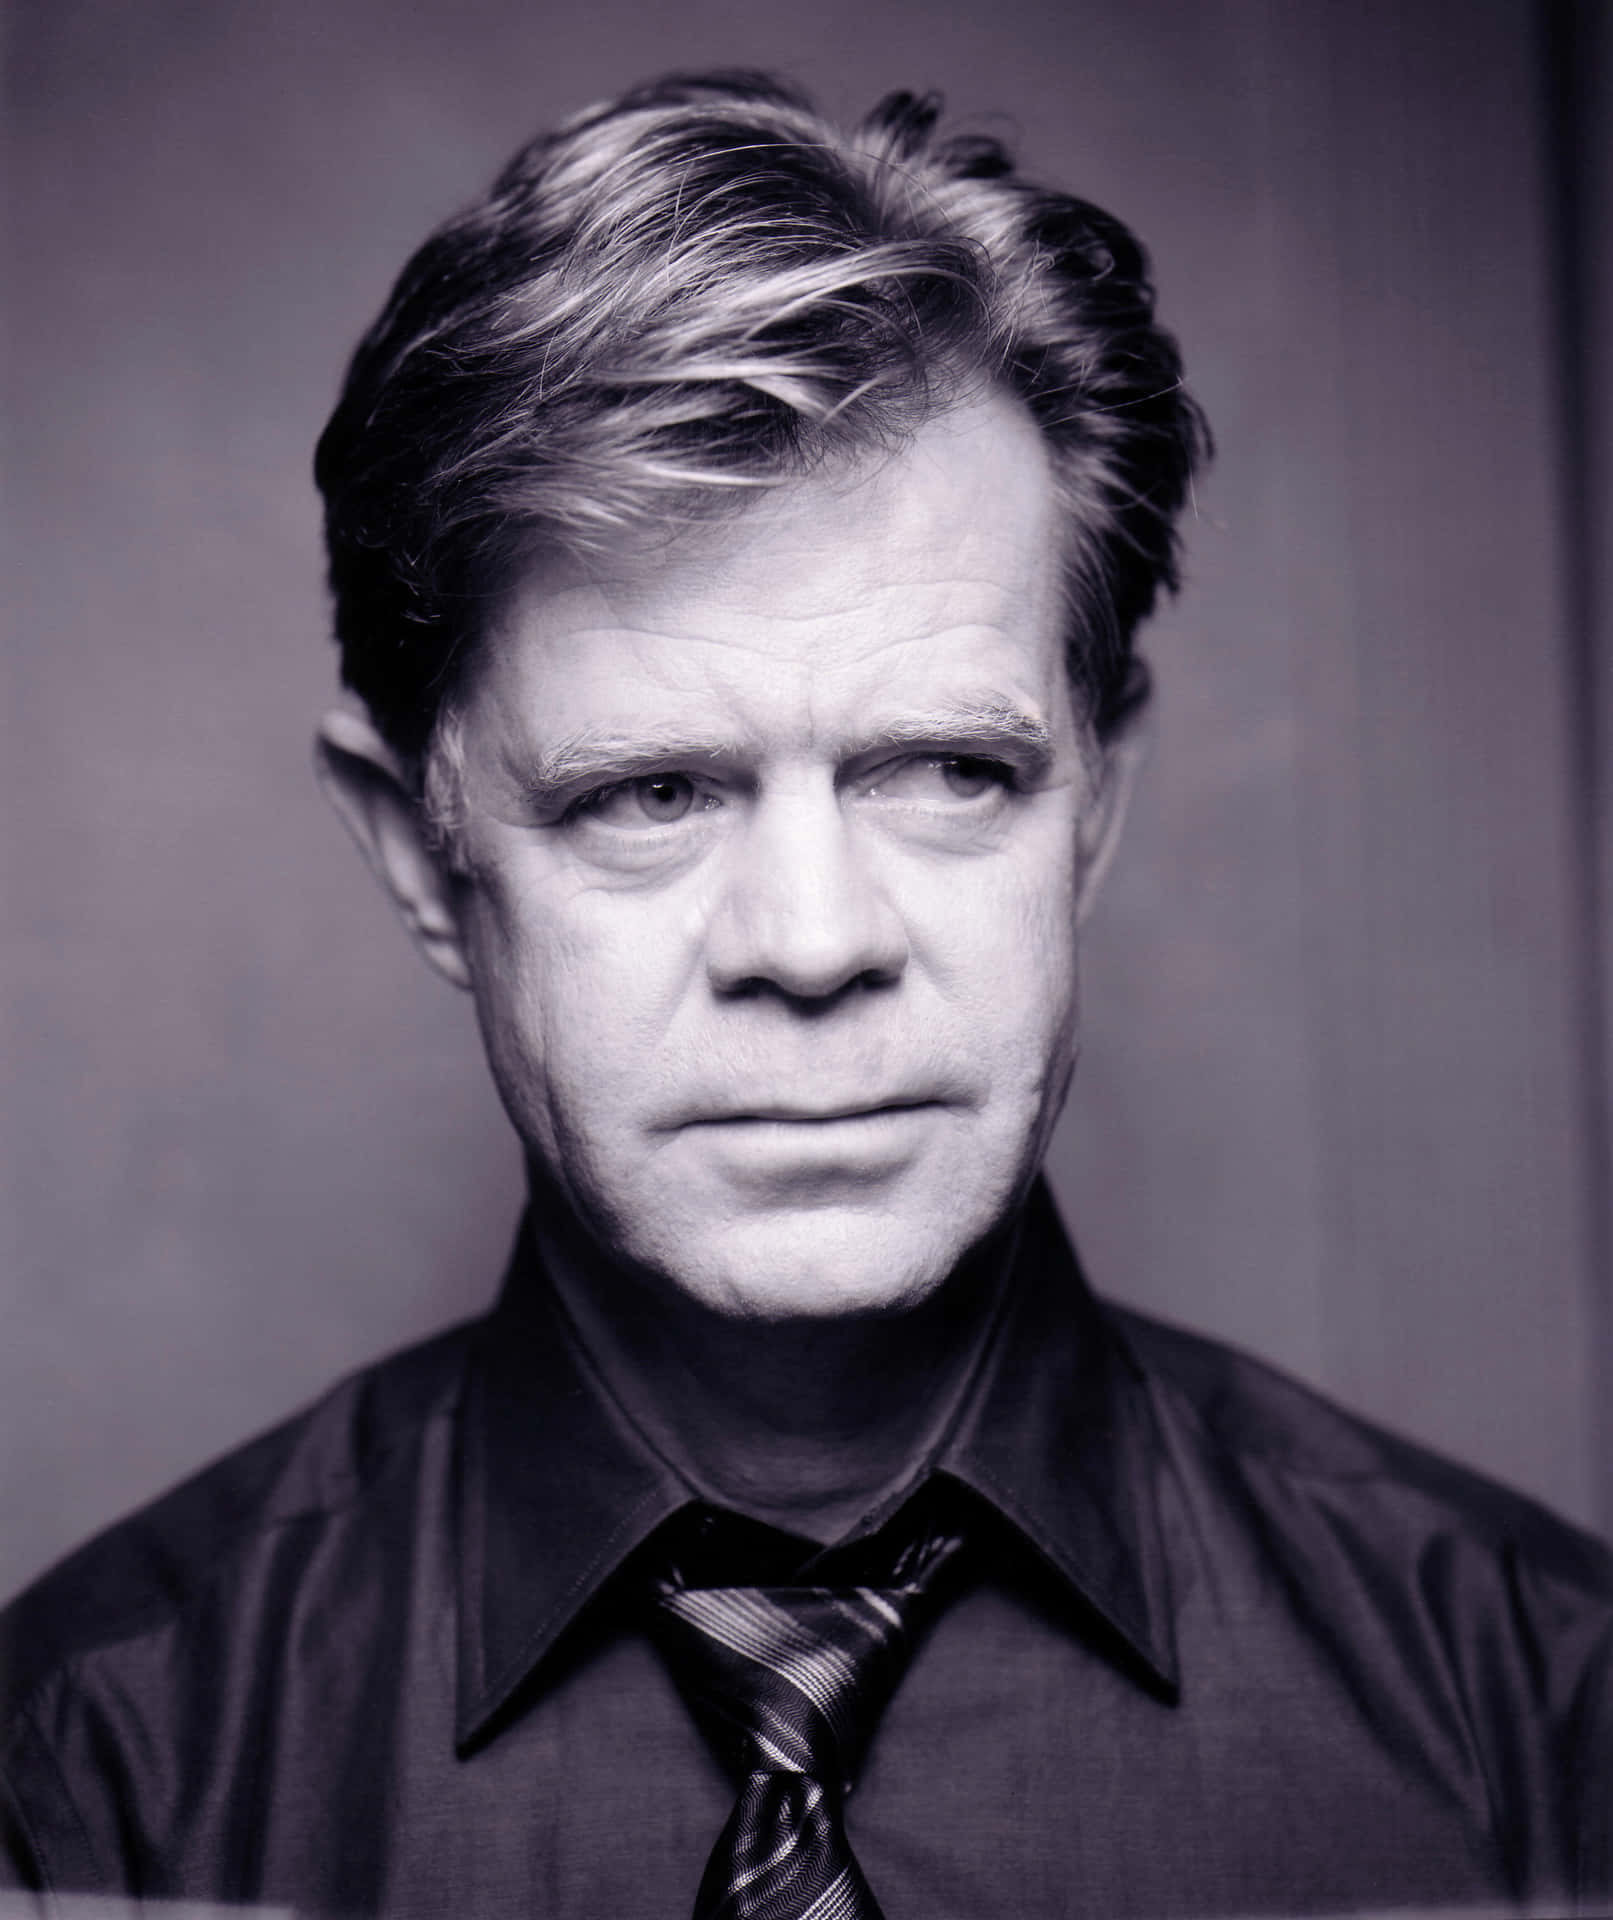 William H. Macy posing during a photoshoot Wallpaper